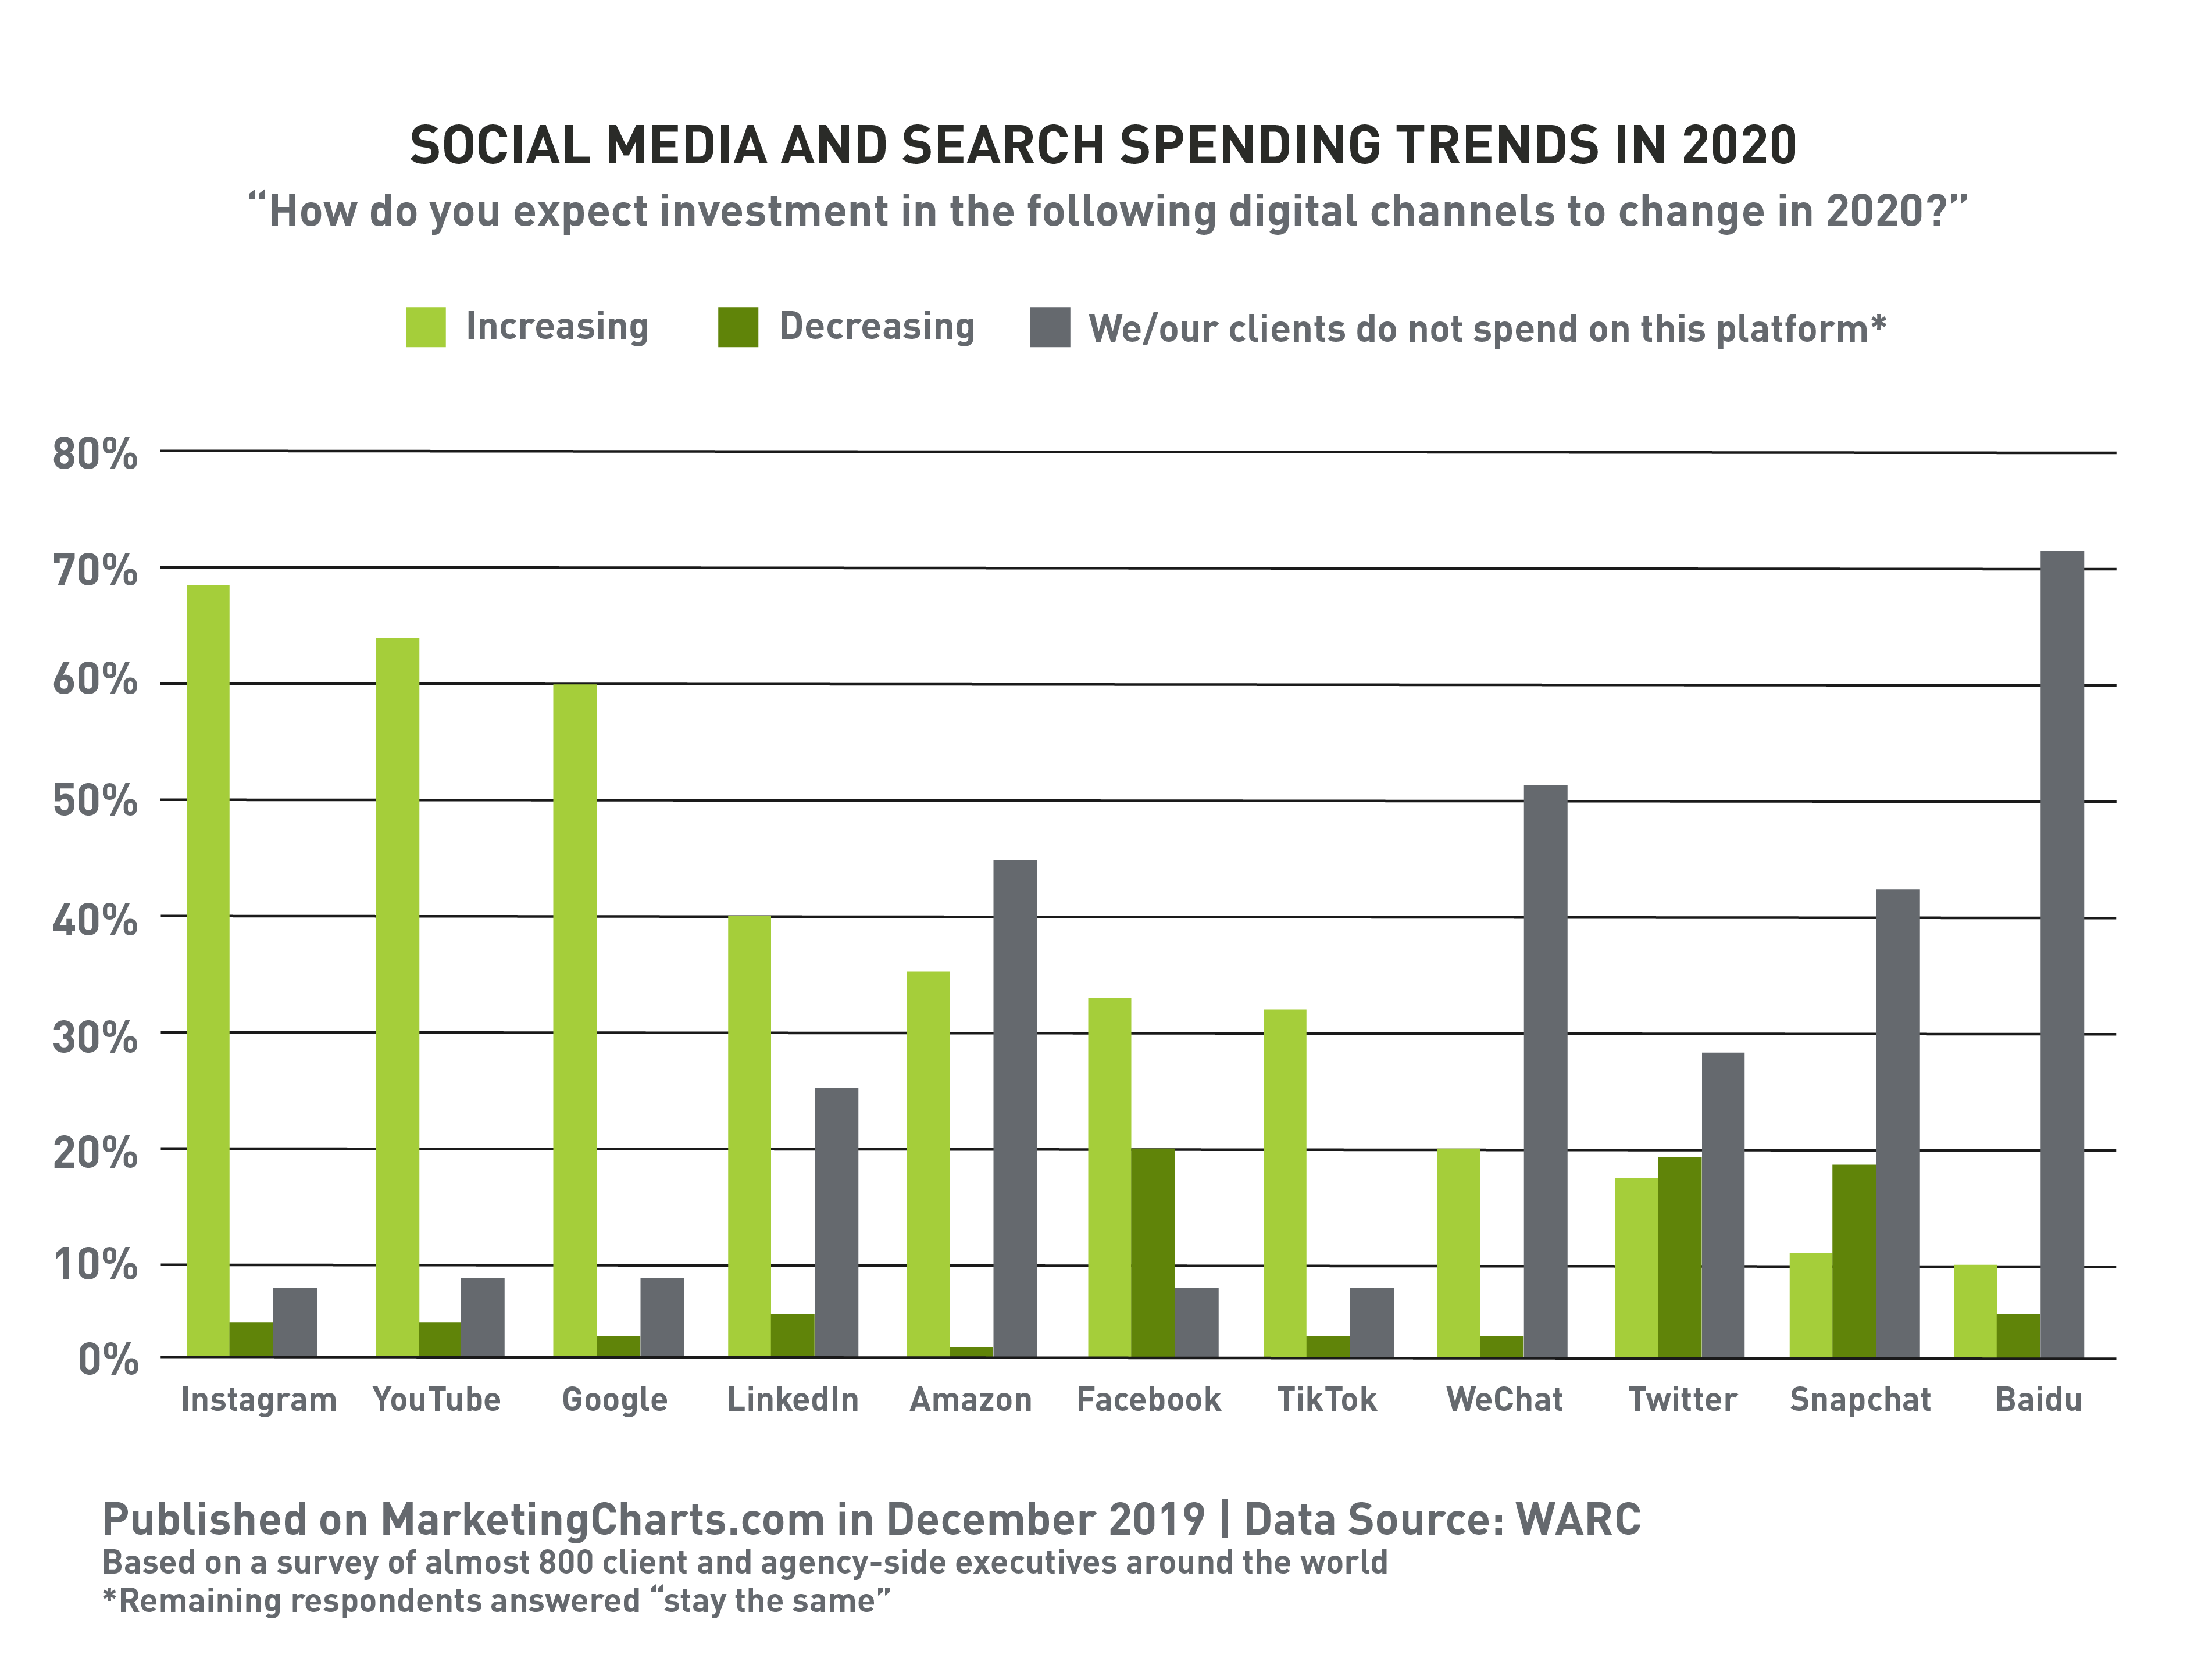 Social Media and Search Spending Trends in 2020